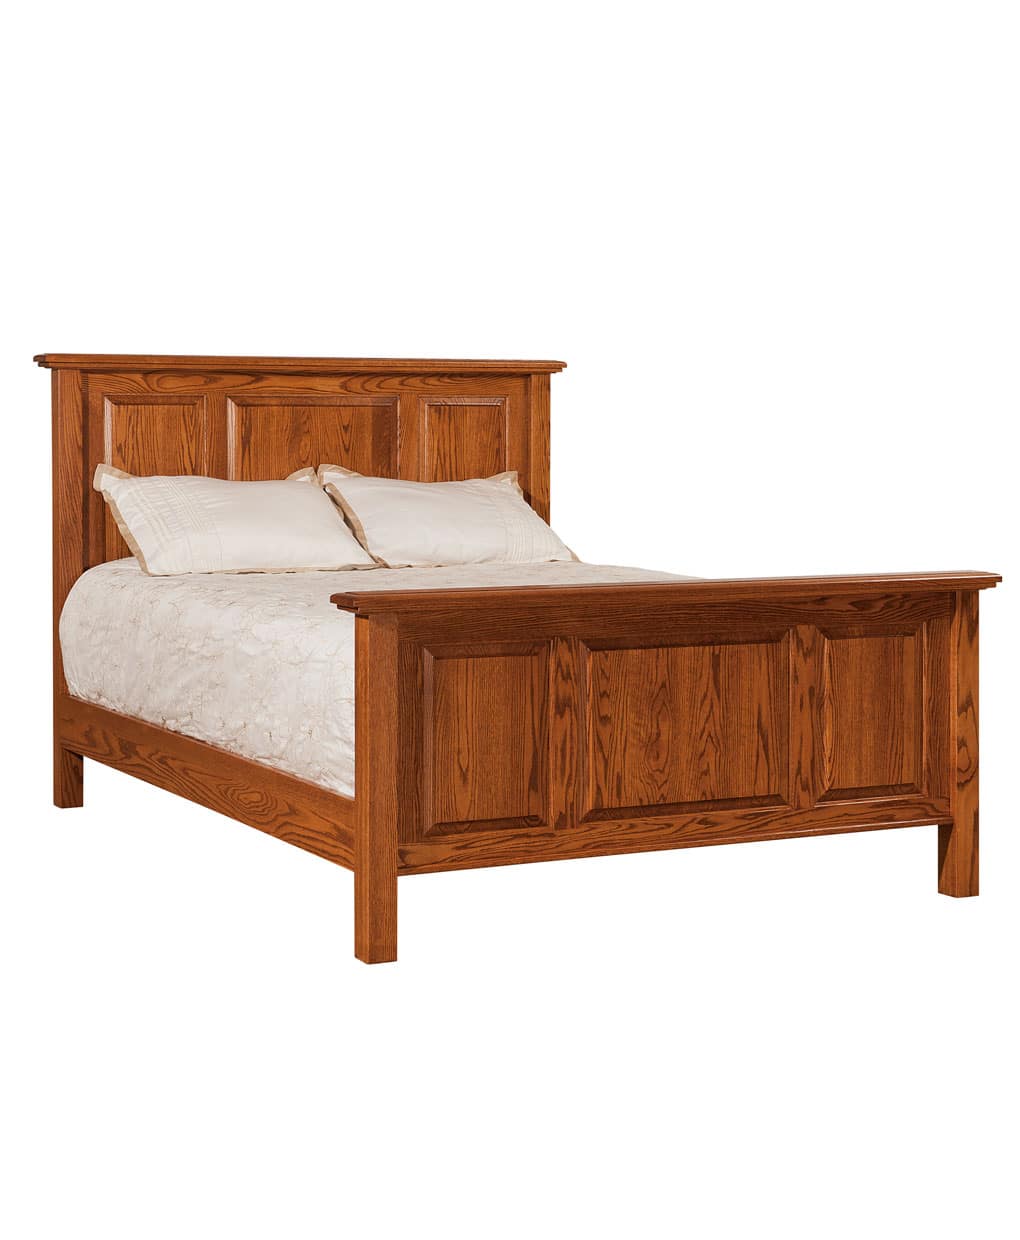 Raised Panel Bed Amish Direct Furniture, Amish Bed Frames